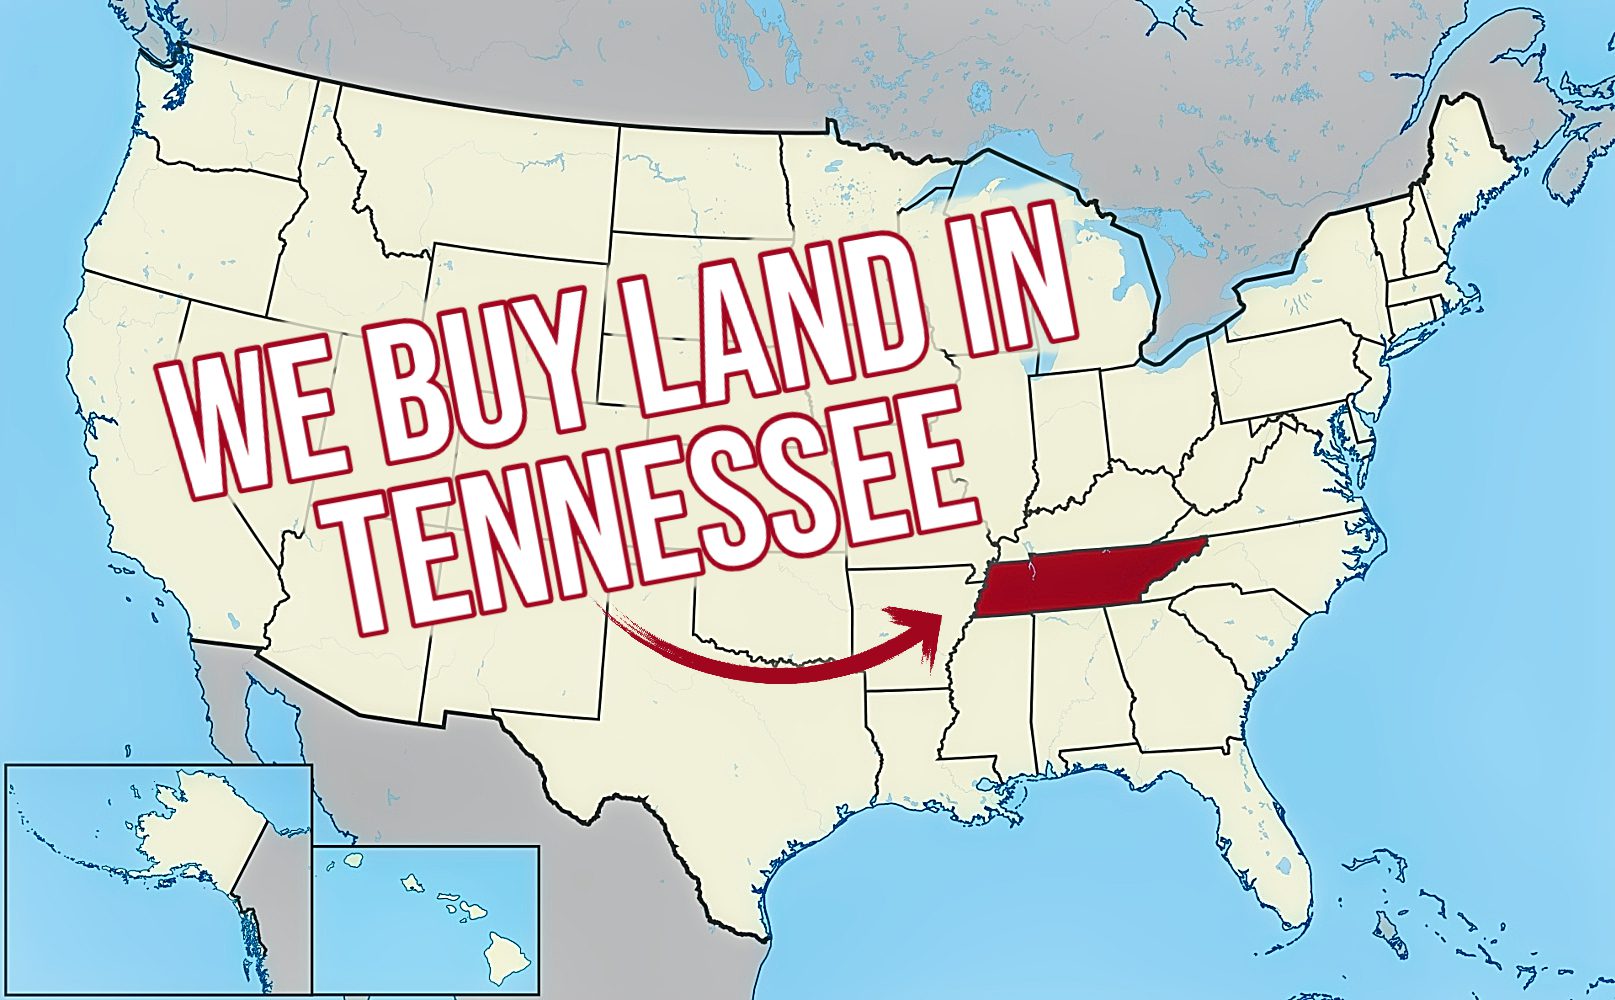 Land Buying Company Tennessee